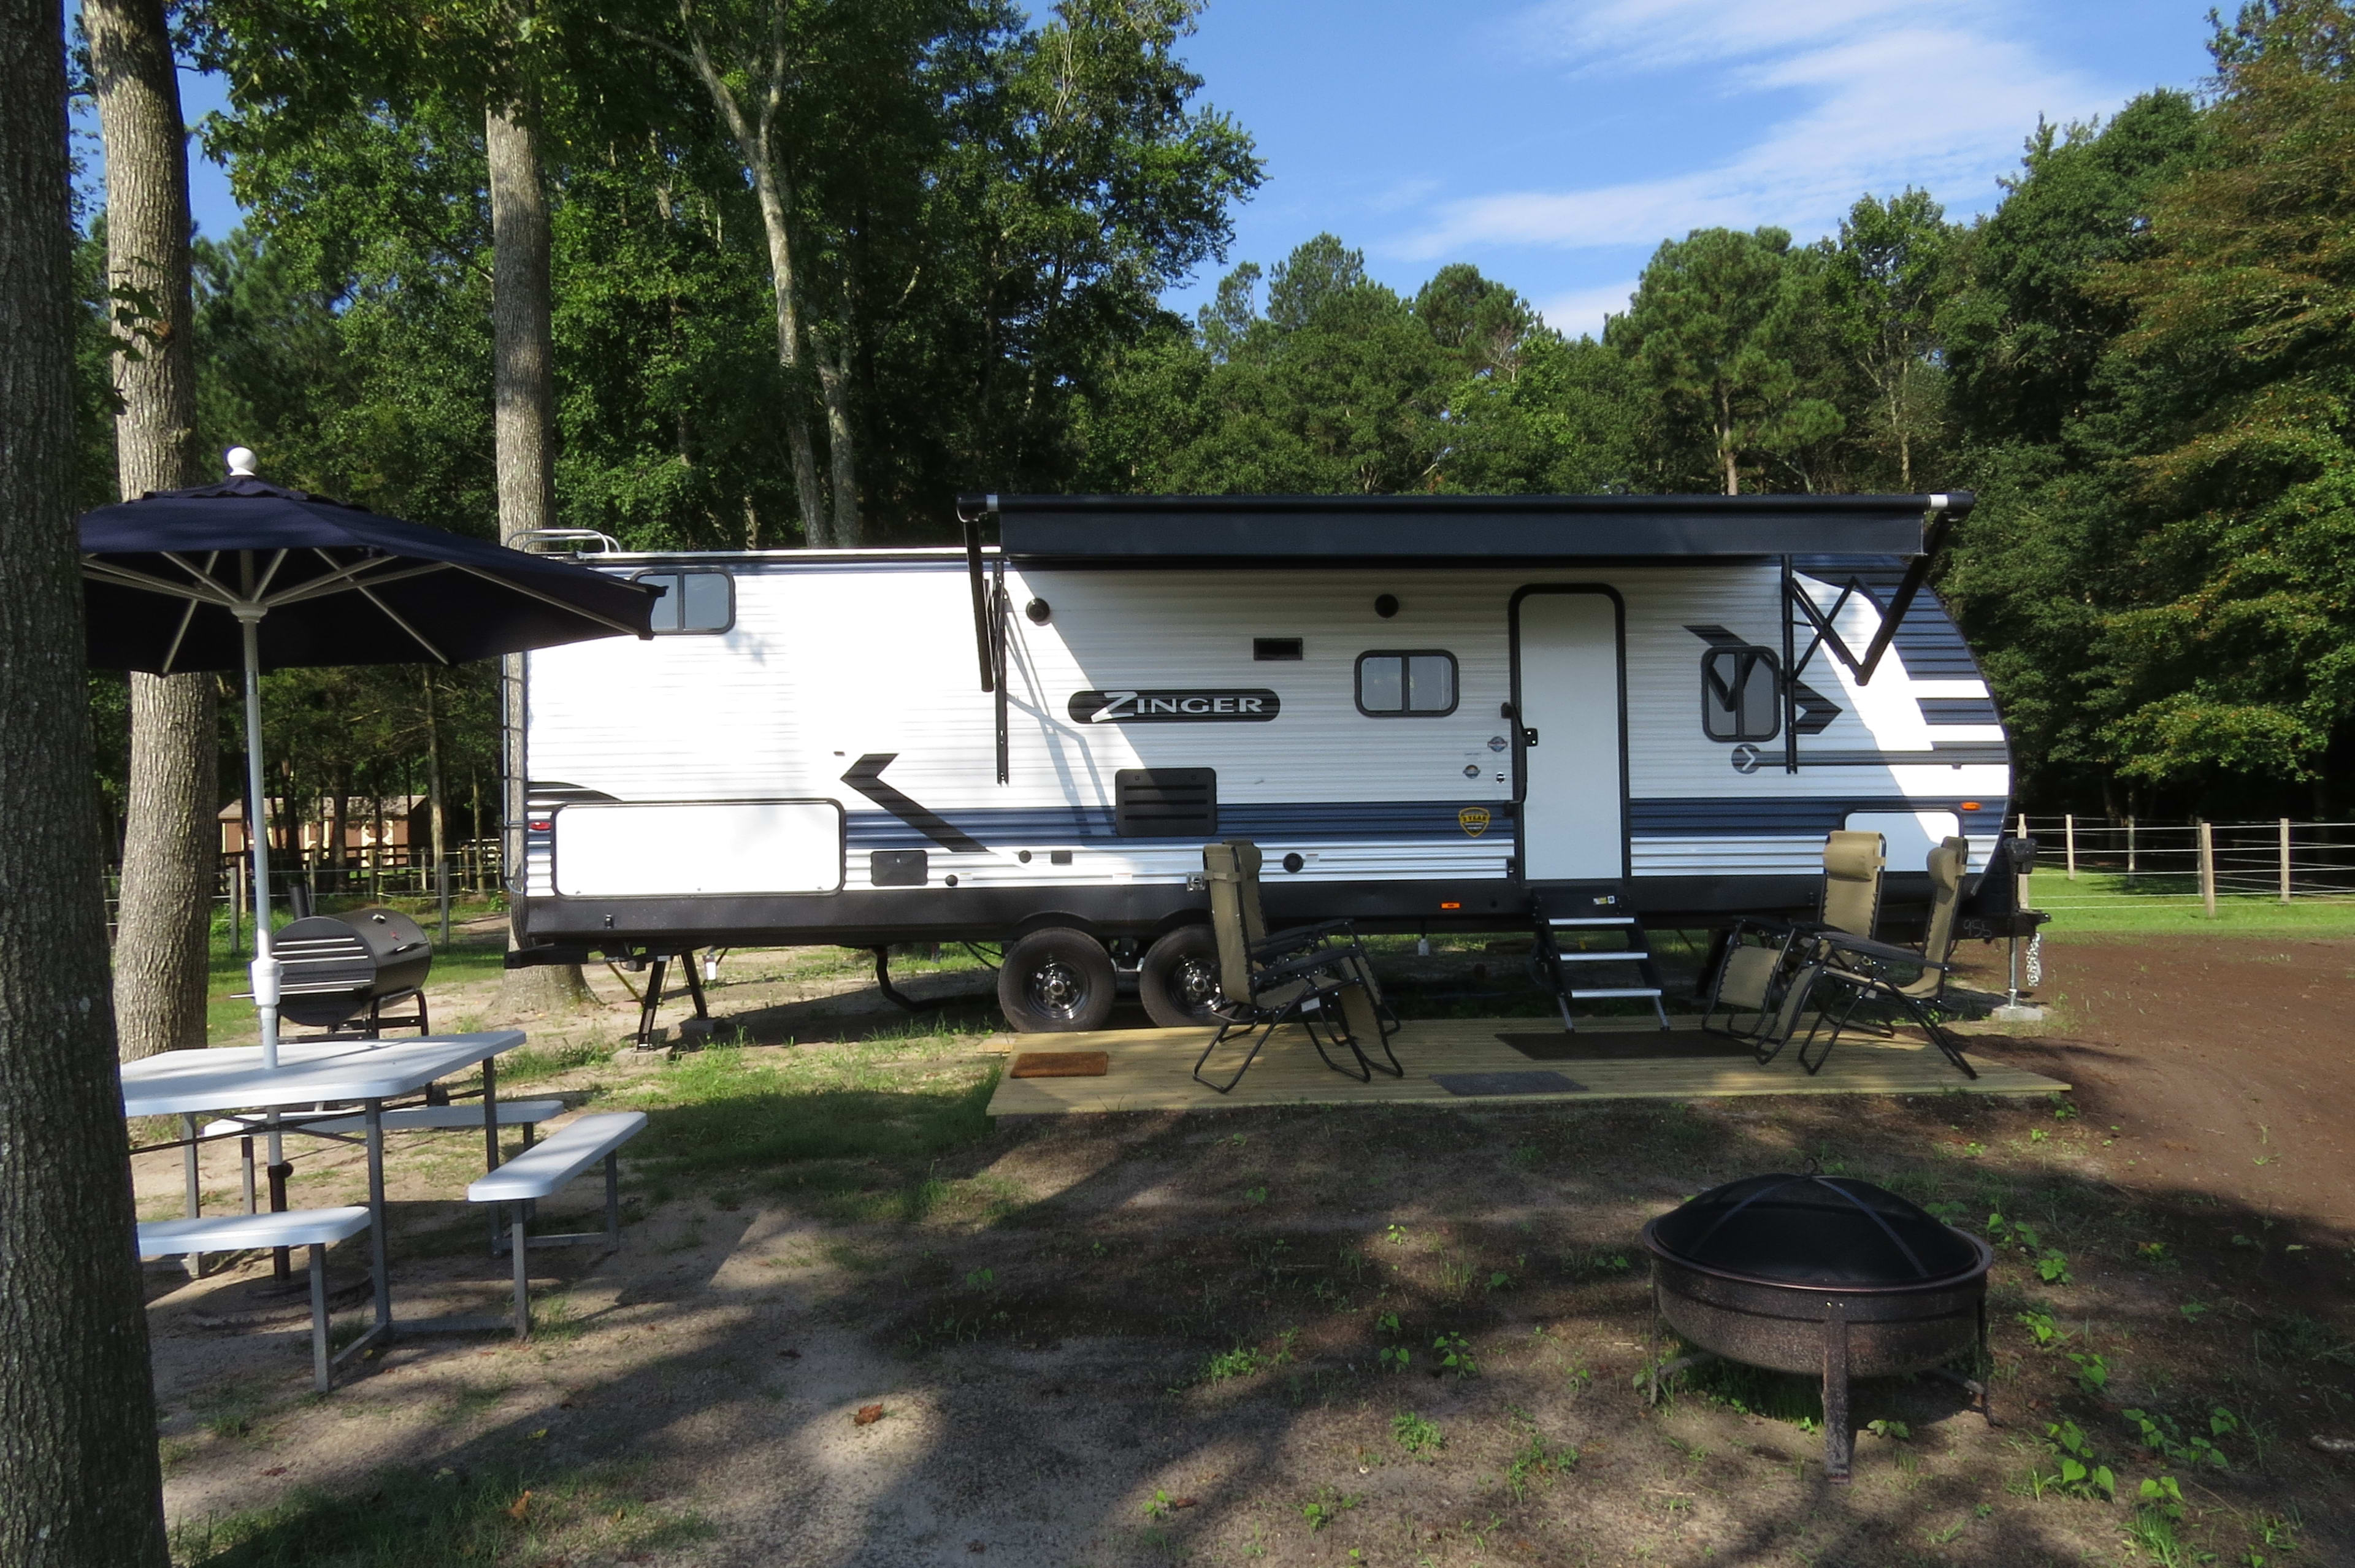 This is our Zinger 29' trailer with a bunk room and master bedroom.  It is equiped with a full kitchen and bath. 